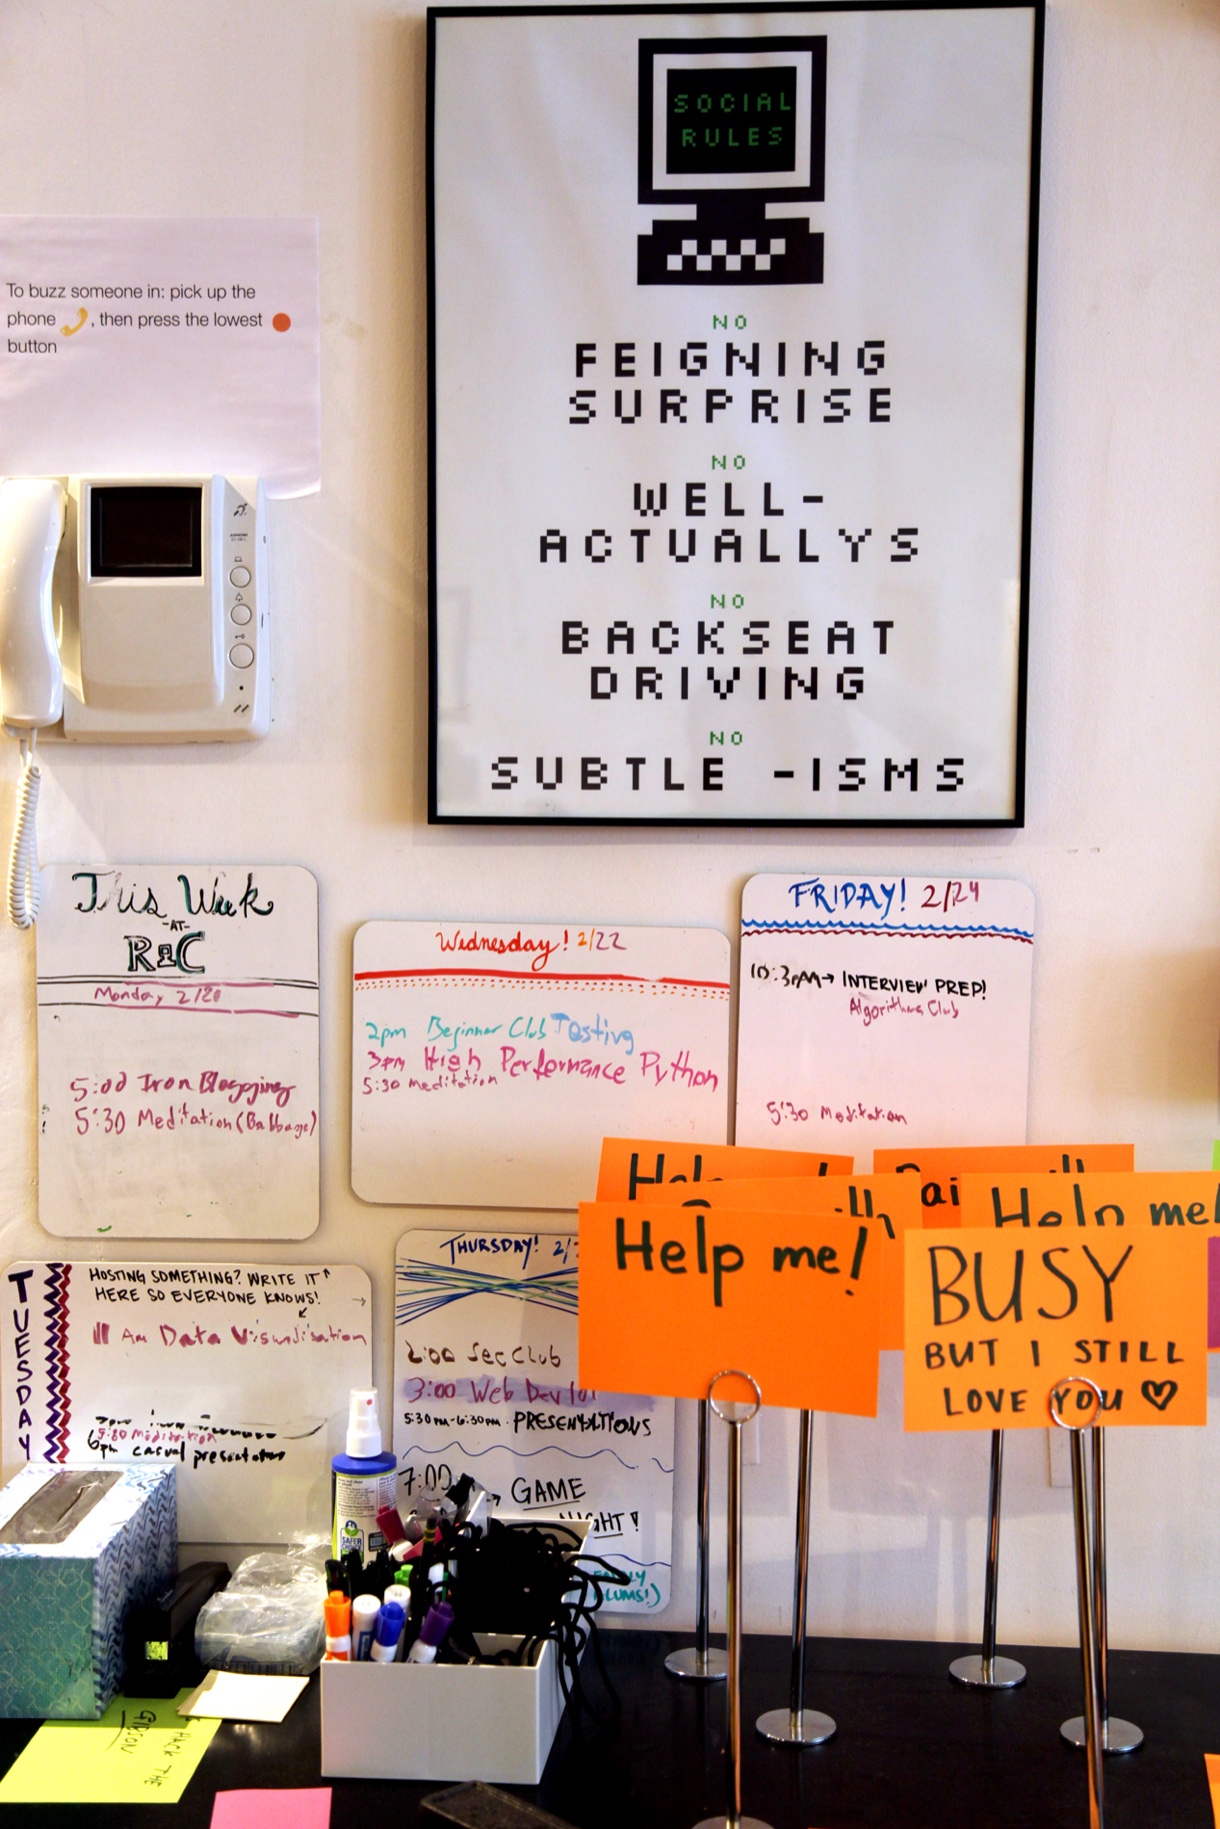 Poster with the following contents: “Social Rules: No Feigning Surprise, No Well-Actually’s, No Backseat Driving, No Subtle -isms”. Below the poster are signs that read “Help me!” and “BUSY, but I still love you <3”